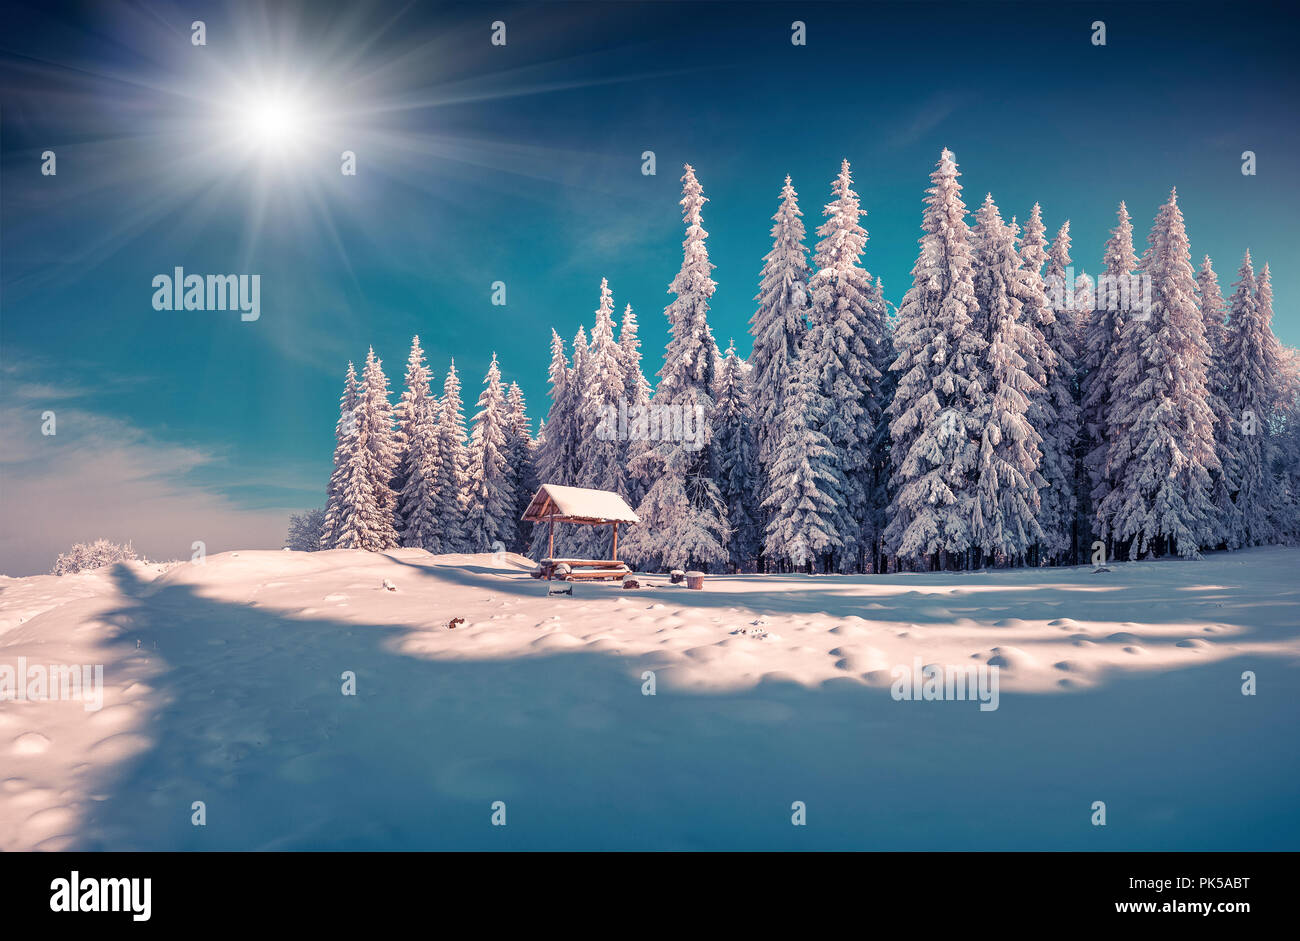 Winter fairy tale after heavy snowfall in the mountain forest. Instagram toning. Stock Photo